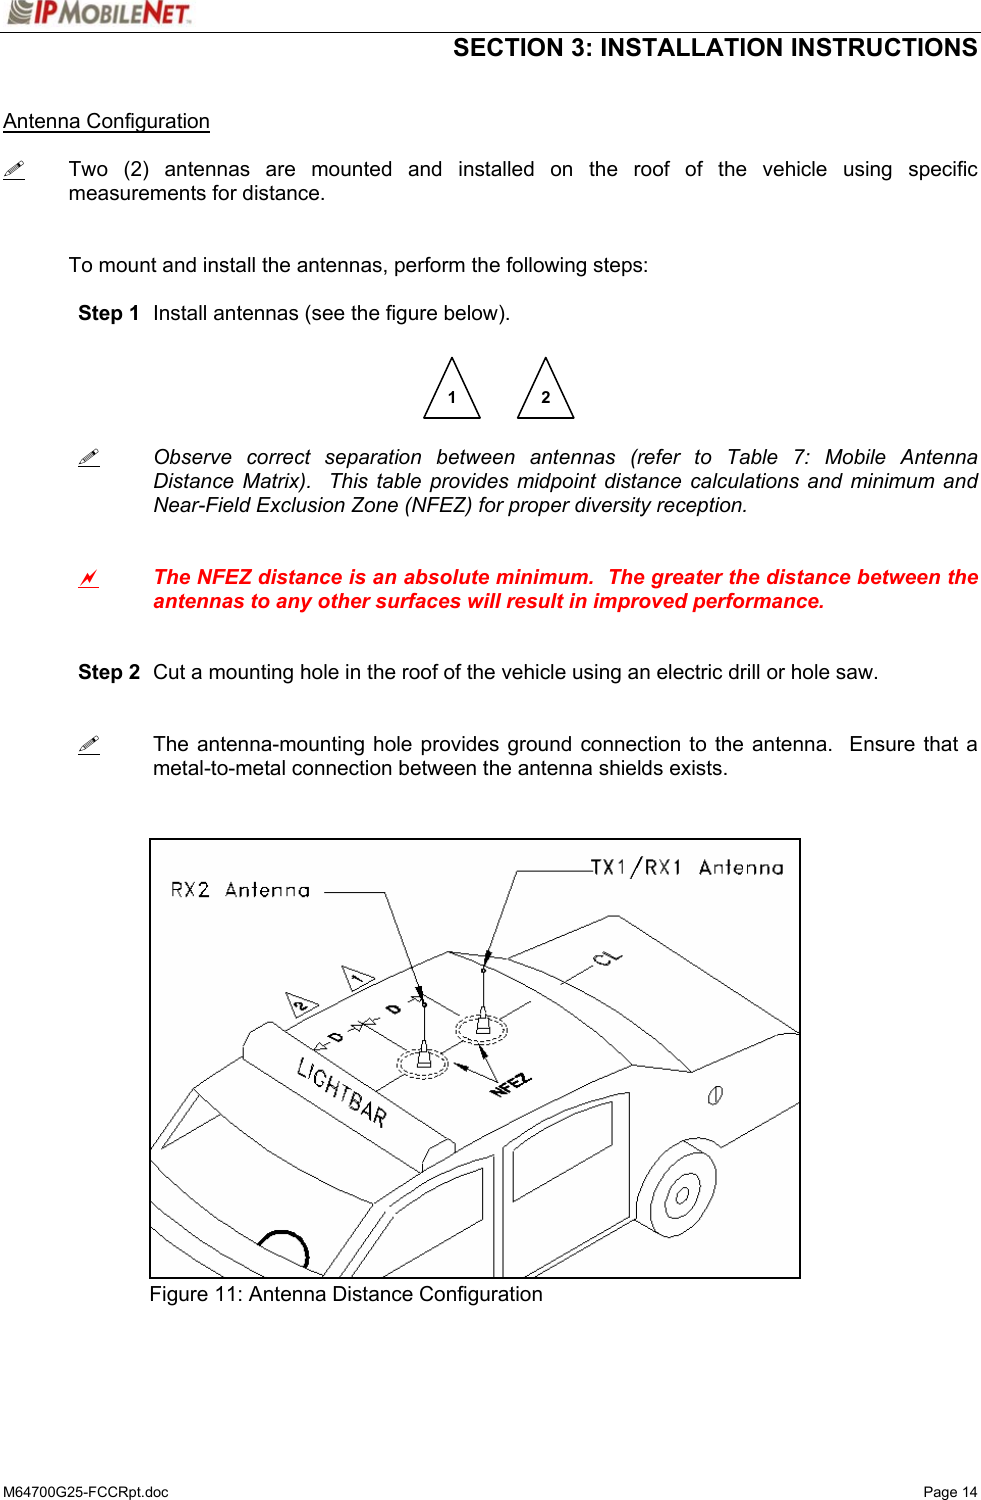  SECTION 3: INSTALLATION INSTRUCTIONS  M64700G25-FCCRpt.doc   Page 14  Antenna Configuration   Two (2) antennas are mounted and installed on the roof of the vehicle using specific measurements for distance.   To mount and install the antennas, perform the following steps:   Step 1  Install antennas (see the figure below).           Observe correct separation between antennas (refer to Table 7: Mobile Antenna   Distance Matrix).  This table provides midpoint distance calculations and minimum and   Near-Field Exclusion Zone (NFEZ) for proper diversity reception.    a The NFEZ distance is an absolute minimum.  The greater the distance between the antennas to any other surfaces will result in improved performance.    Step 2  Cut a mounting hole in the roof of the vehicle using an electric drill or hole saw.      The antenna-mounting hole provides ground connection to the antenna.  Ensure that a metal-to-metal connection between the antenna shields exists.                  Figure 11: Antenna Distance Configuration    1  2 